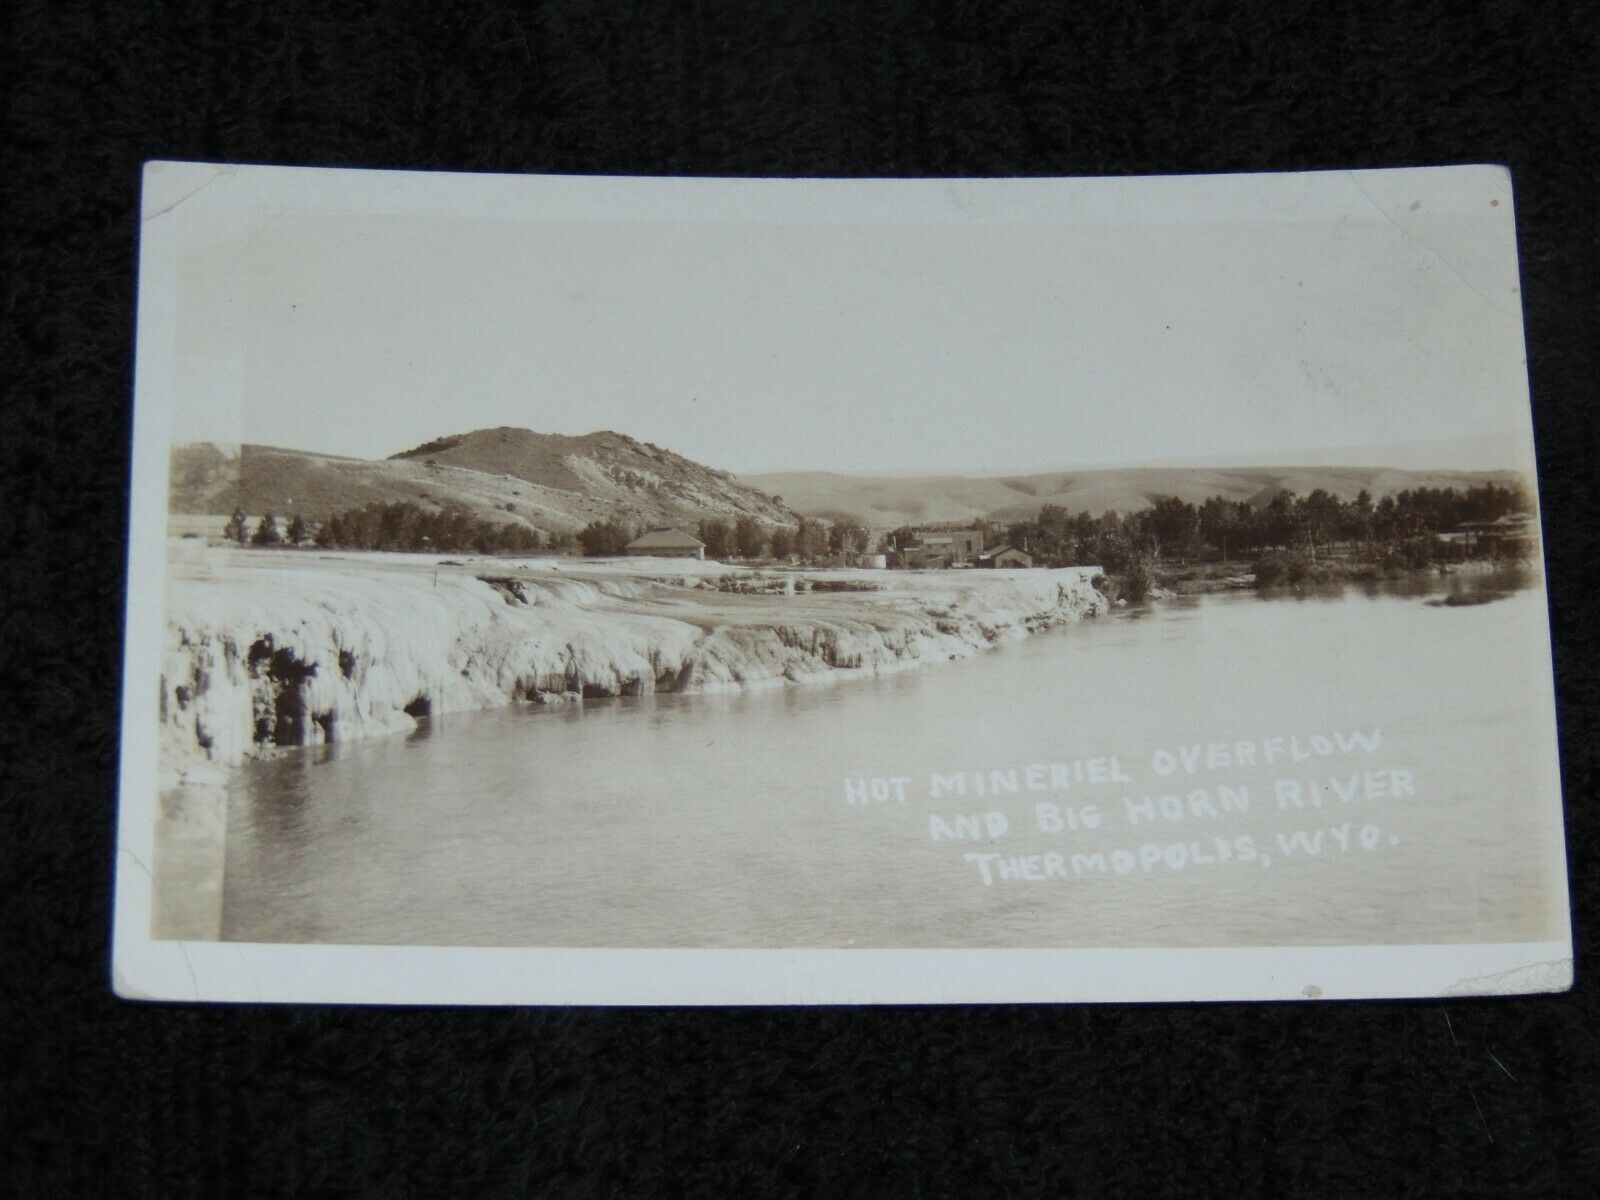 Circa 1910 Postcard "hot Mineral Overflow & Big Horn River Thermopolis, Wyoming"